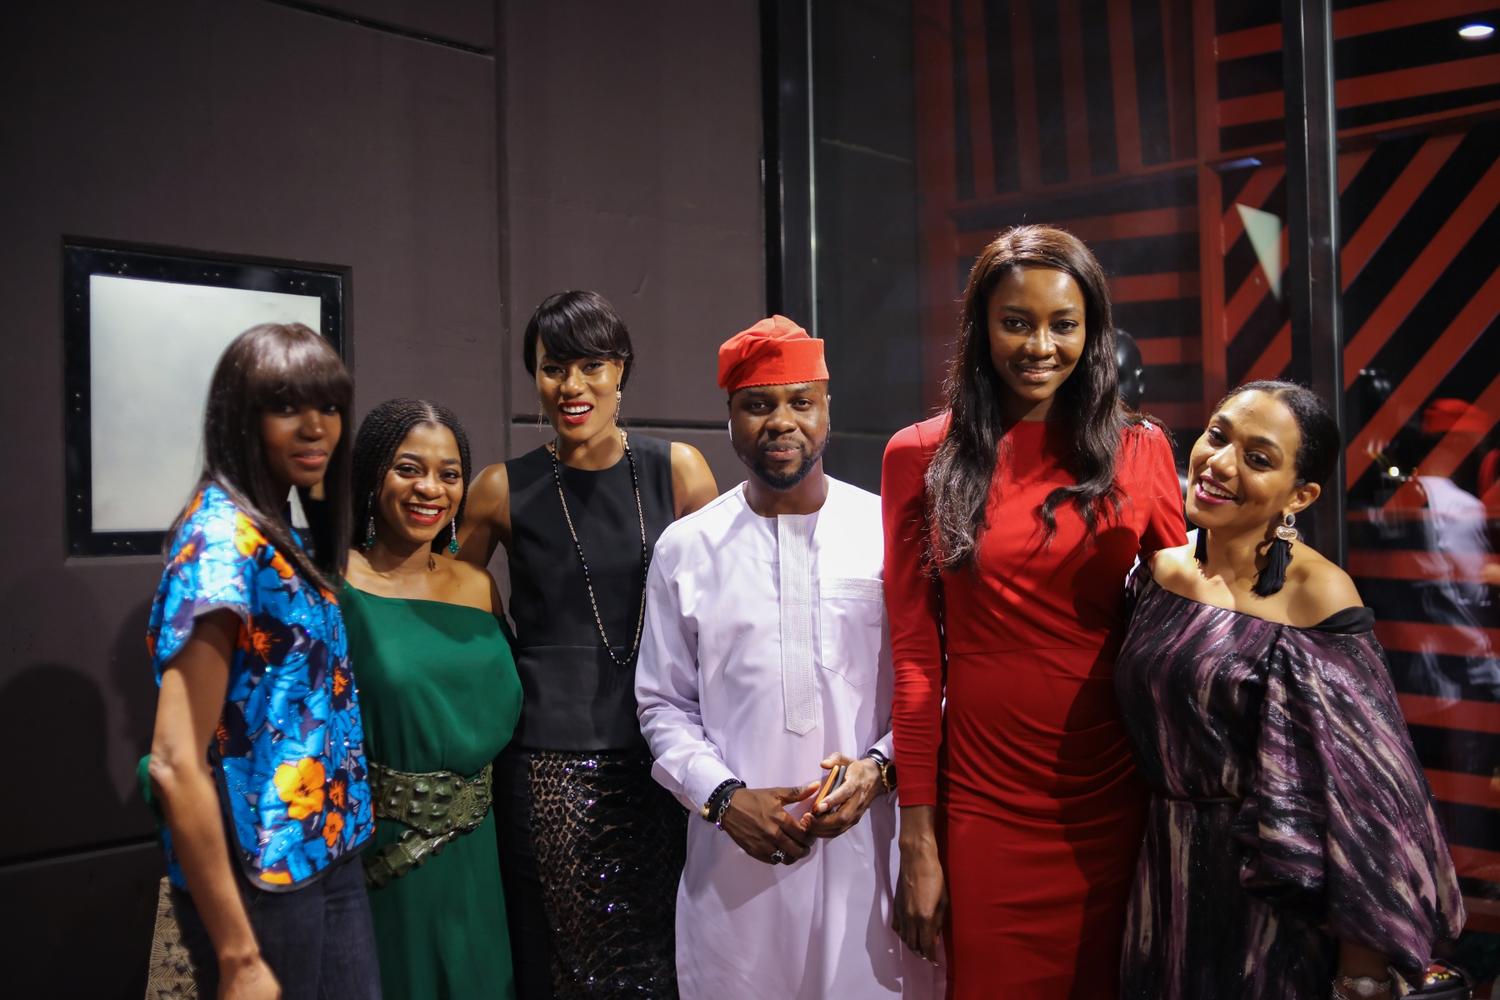 Inside Naomi Campbell’s Exclusive Book Signing Event in ALARA, Lagos